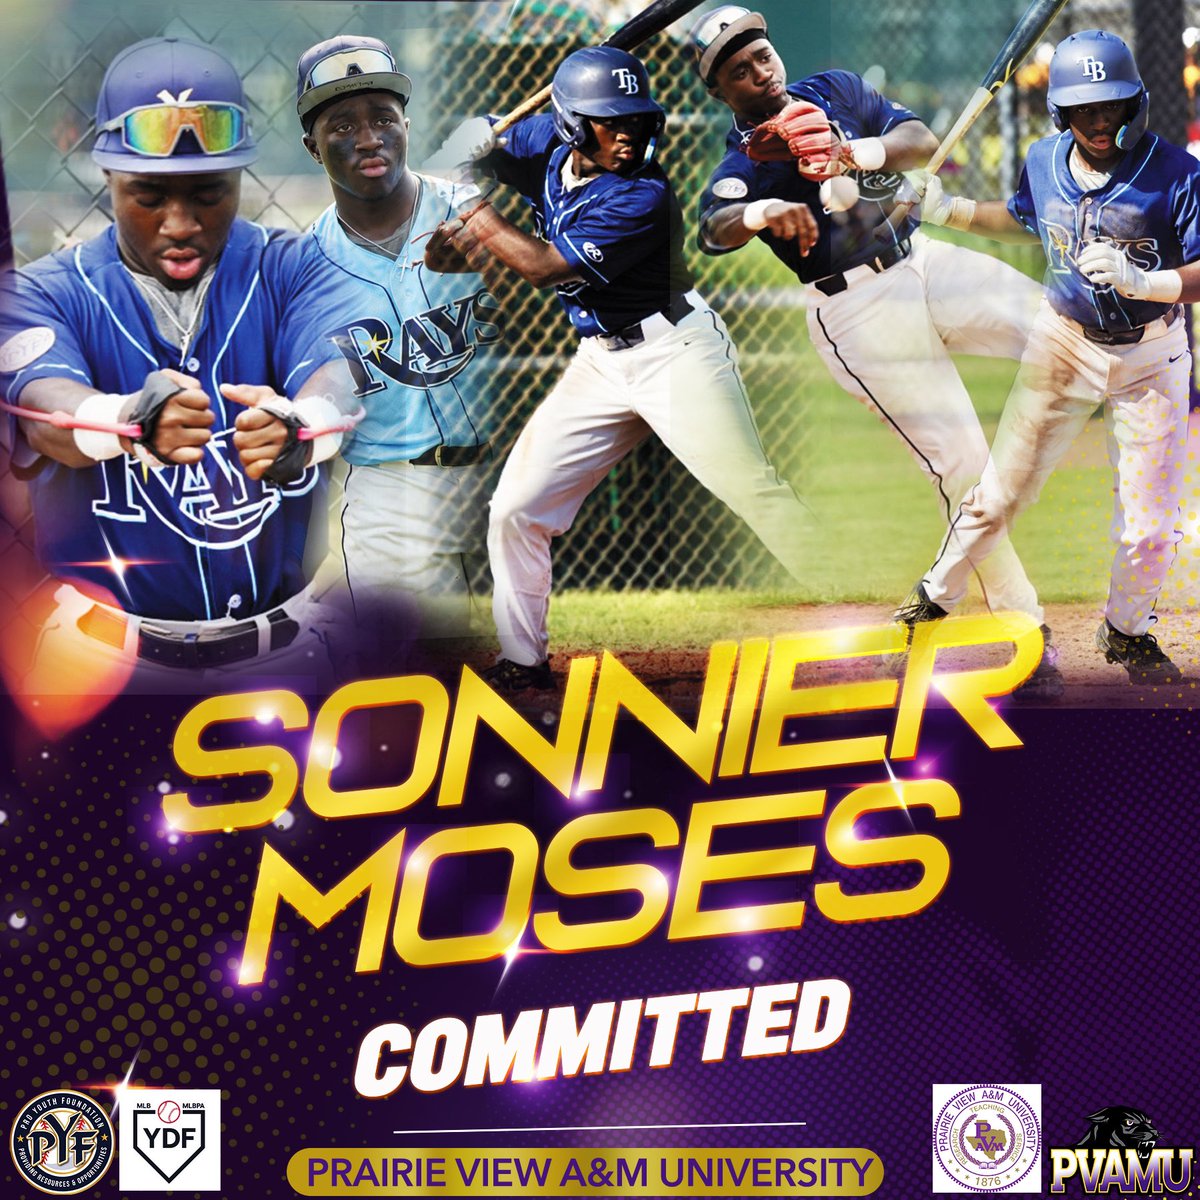 Congrats to PYF Rays Team FL player Sonnier Moses @sonniermoses360 24’ on his commitment to Prairie View A&M University. #pvamu #hbcu #pyfhbucshowcasecamp @Baseball_YDF